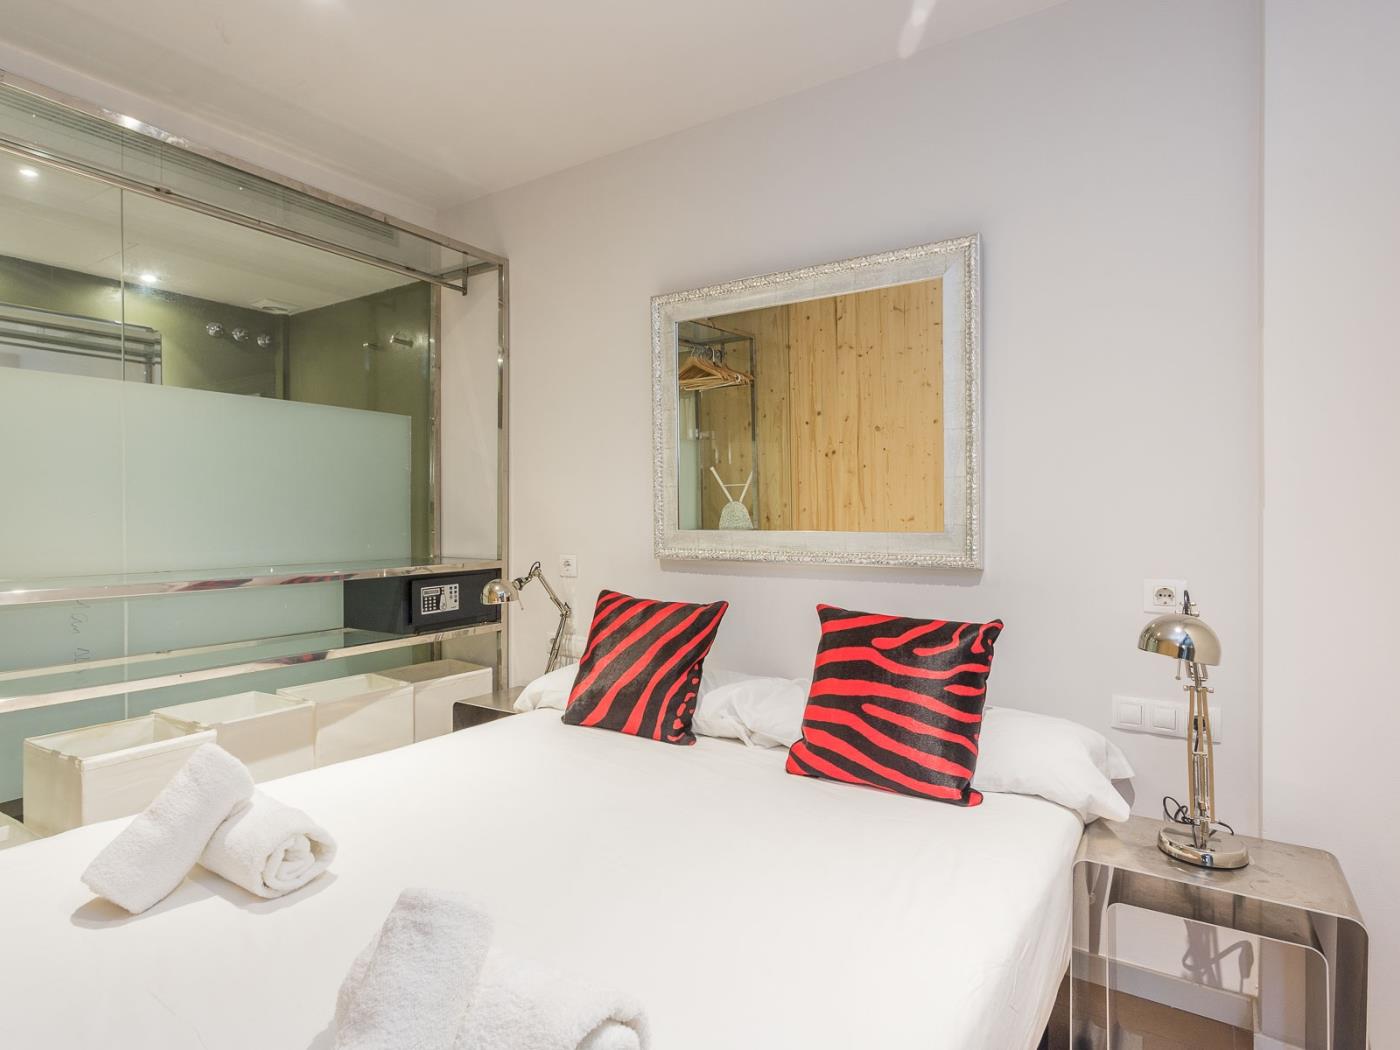 Lovely apartment in Sant Gervasi for monthly rentals - My Space Barcelona Apartments